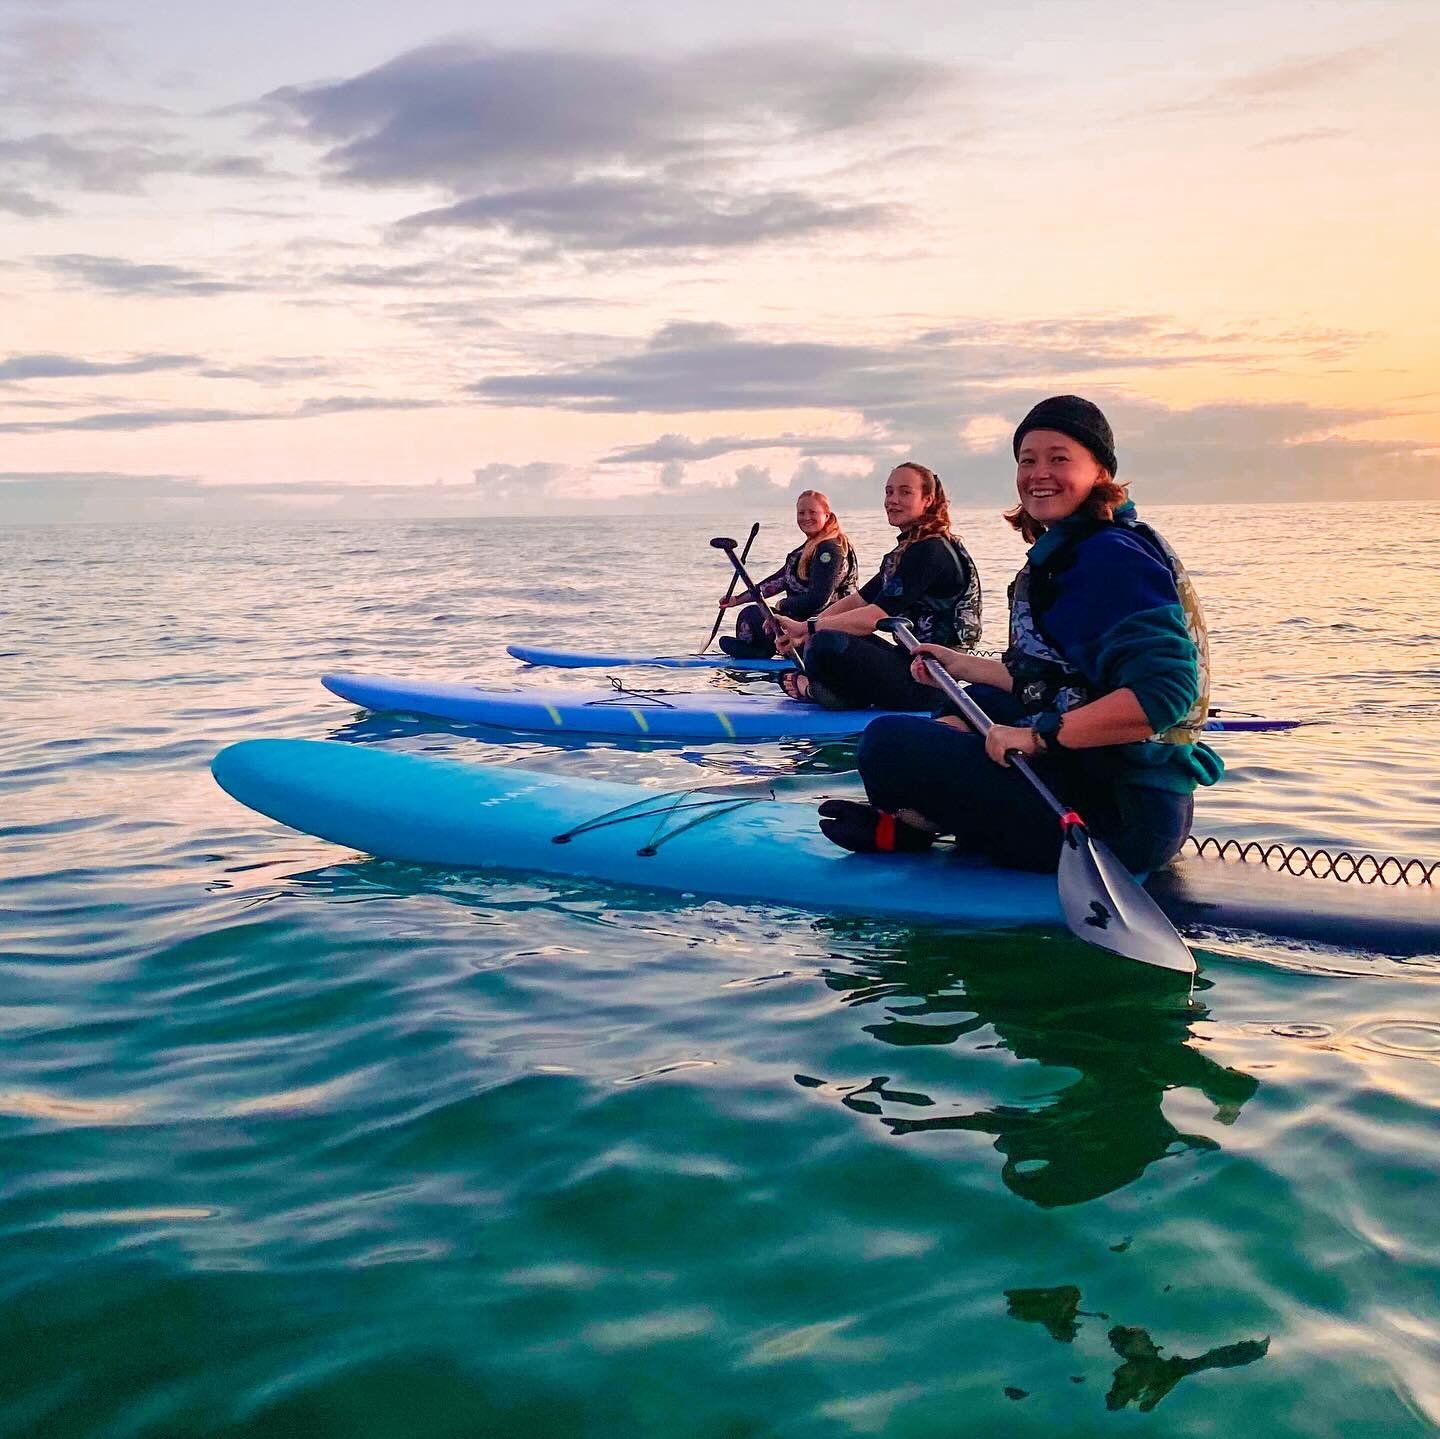 FINAL SUNSET SUP ON THE SEA for the season tomorrow night!

Sat 27/4
4:45pm-5:45pm
No wind
No swell
High Tide
Full Moon.

Link in bio to book for your last chance to sup with me until October!

#enliven #standuppaddleboarding #sup #adelaide #womenout